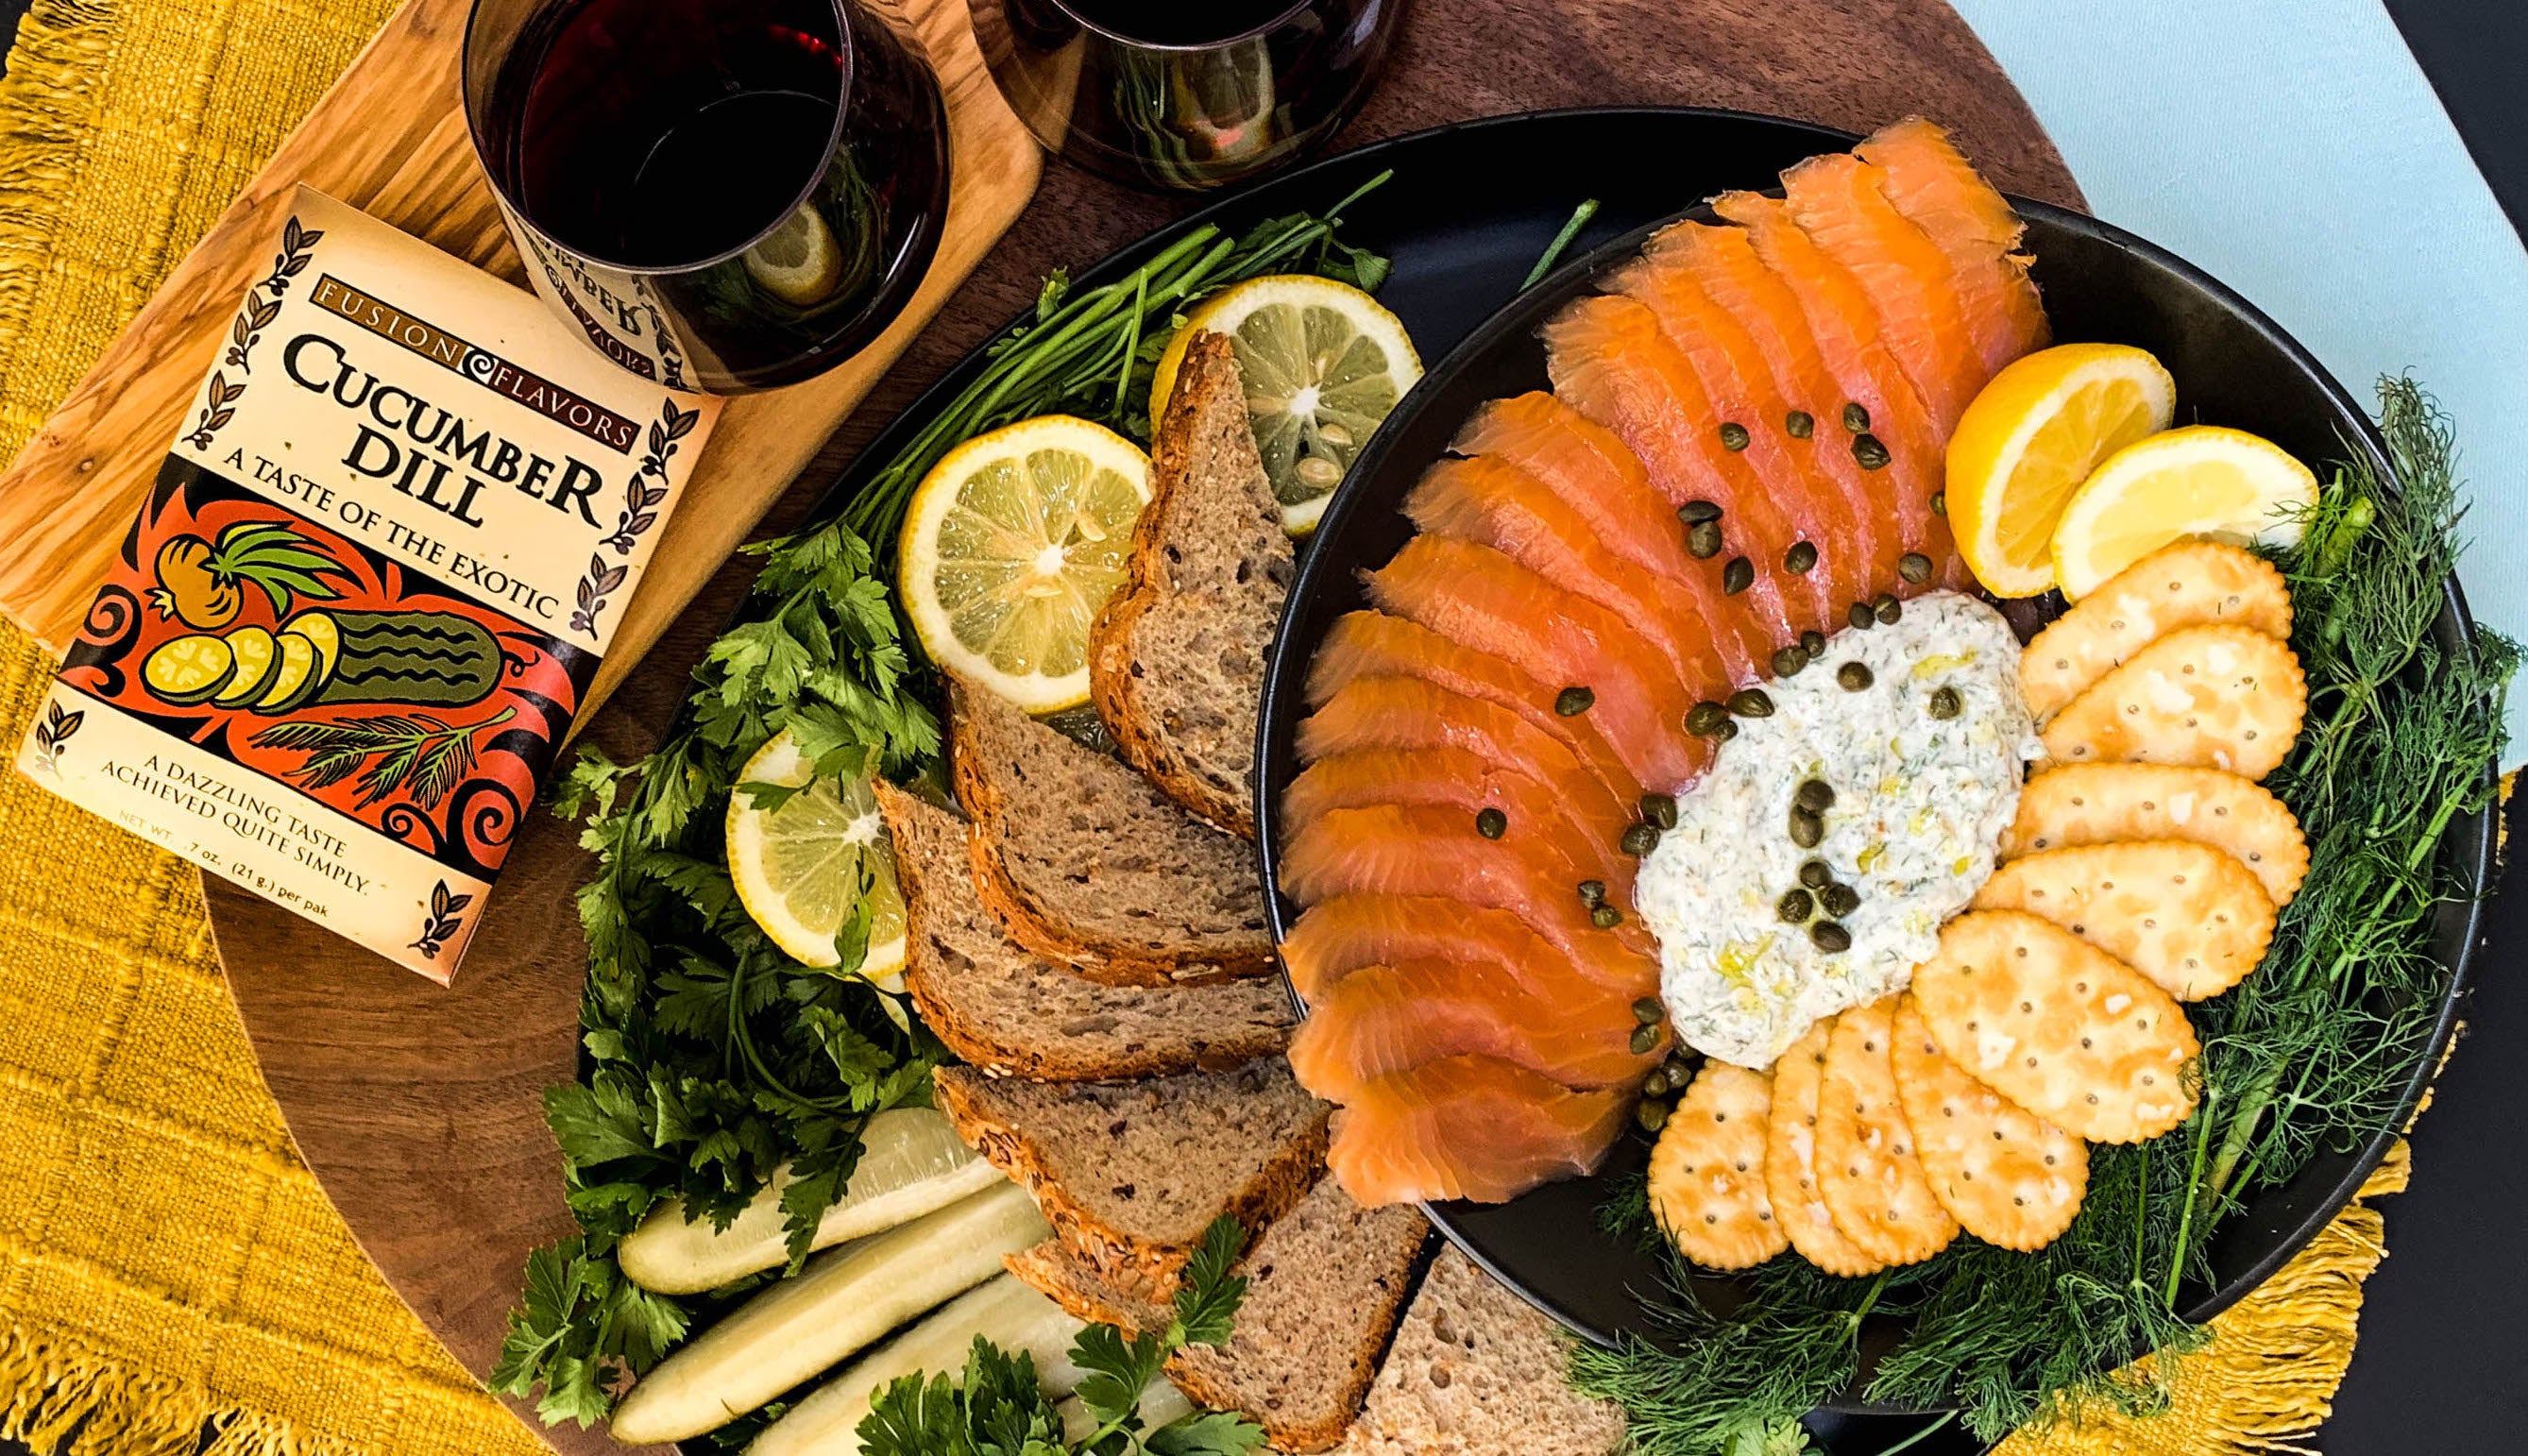 Dill dip in center of charcuterie board with smoked salmon and crackers around the dip. Garnished with capers, lemon wedges and rye bread slices.